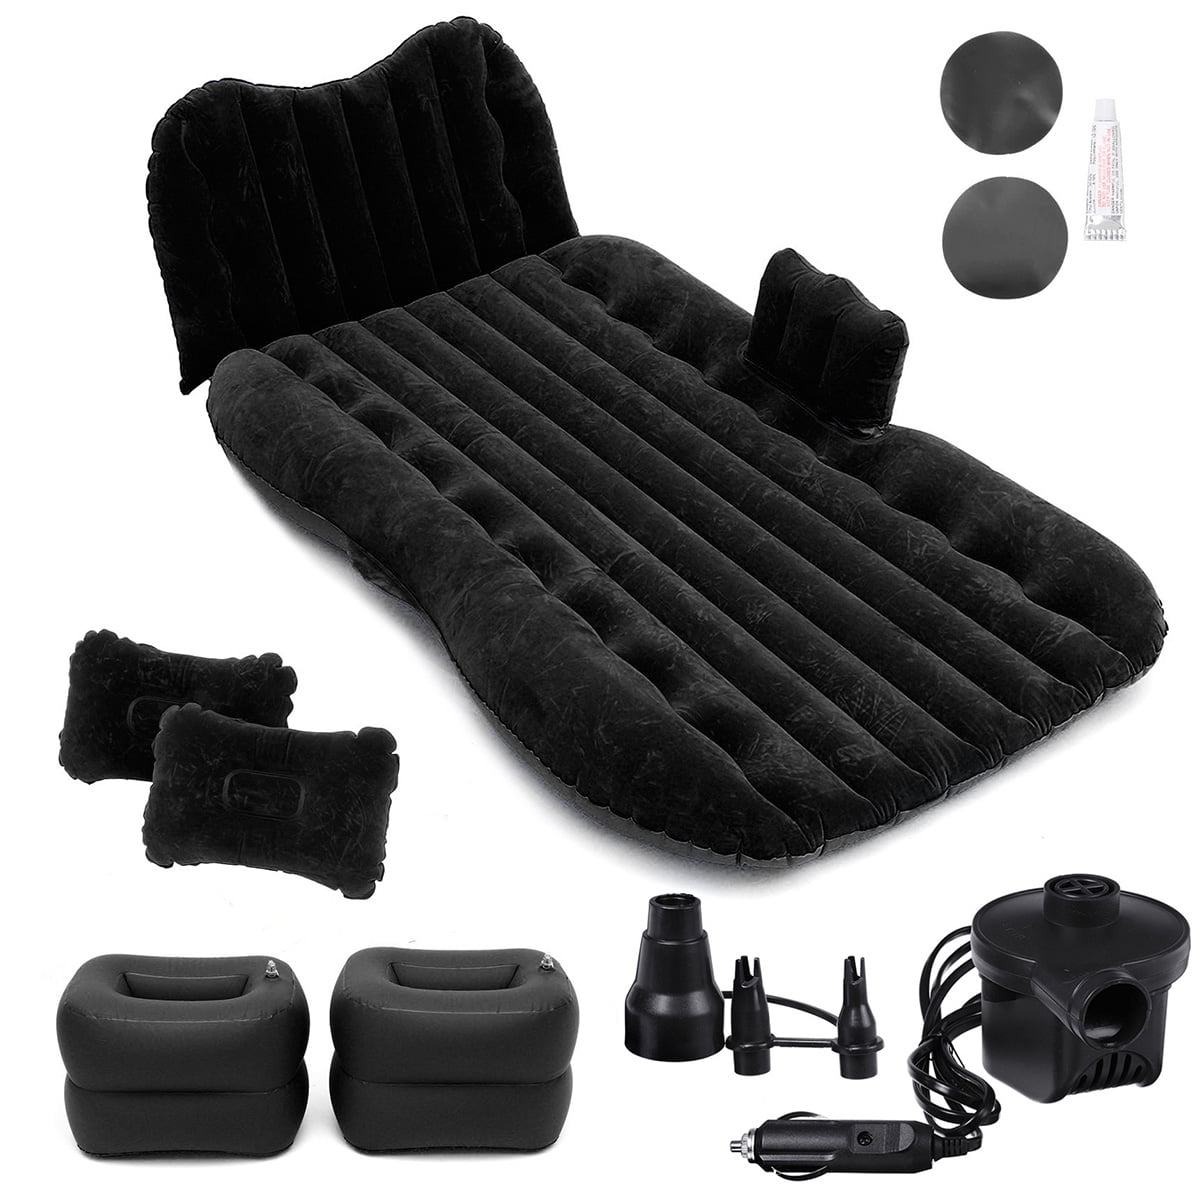 Details about   Car Air Mattress Bed Inflatable Camping Travel Sleeping Back Seat Cushion Pads 